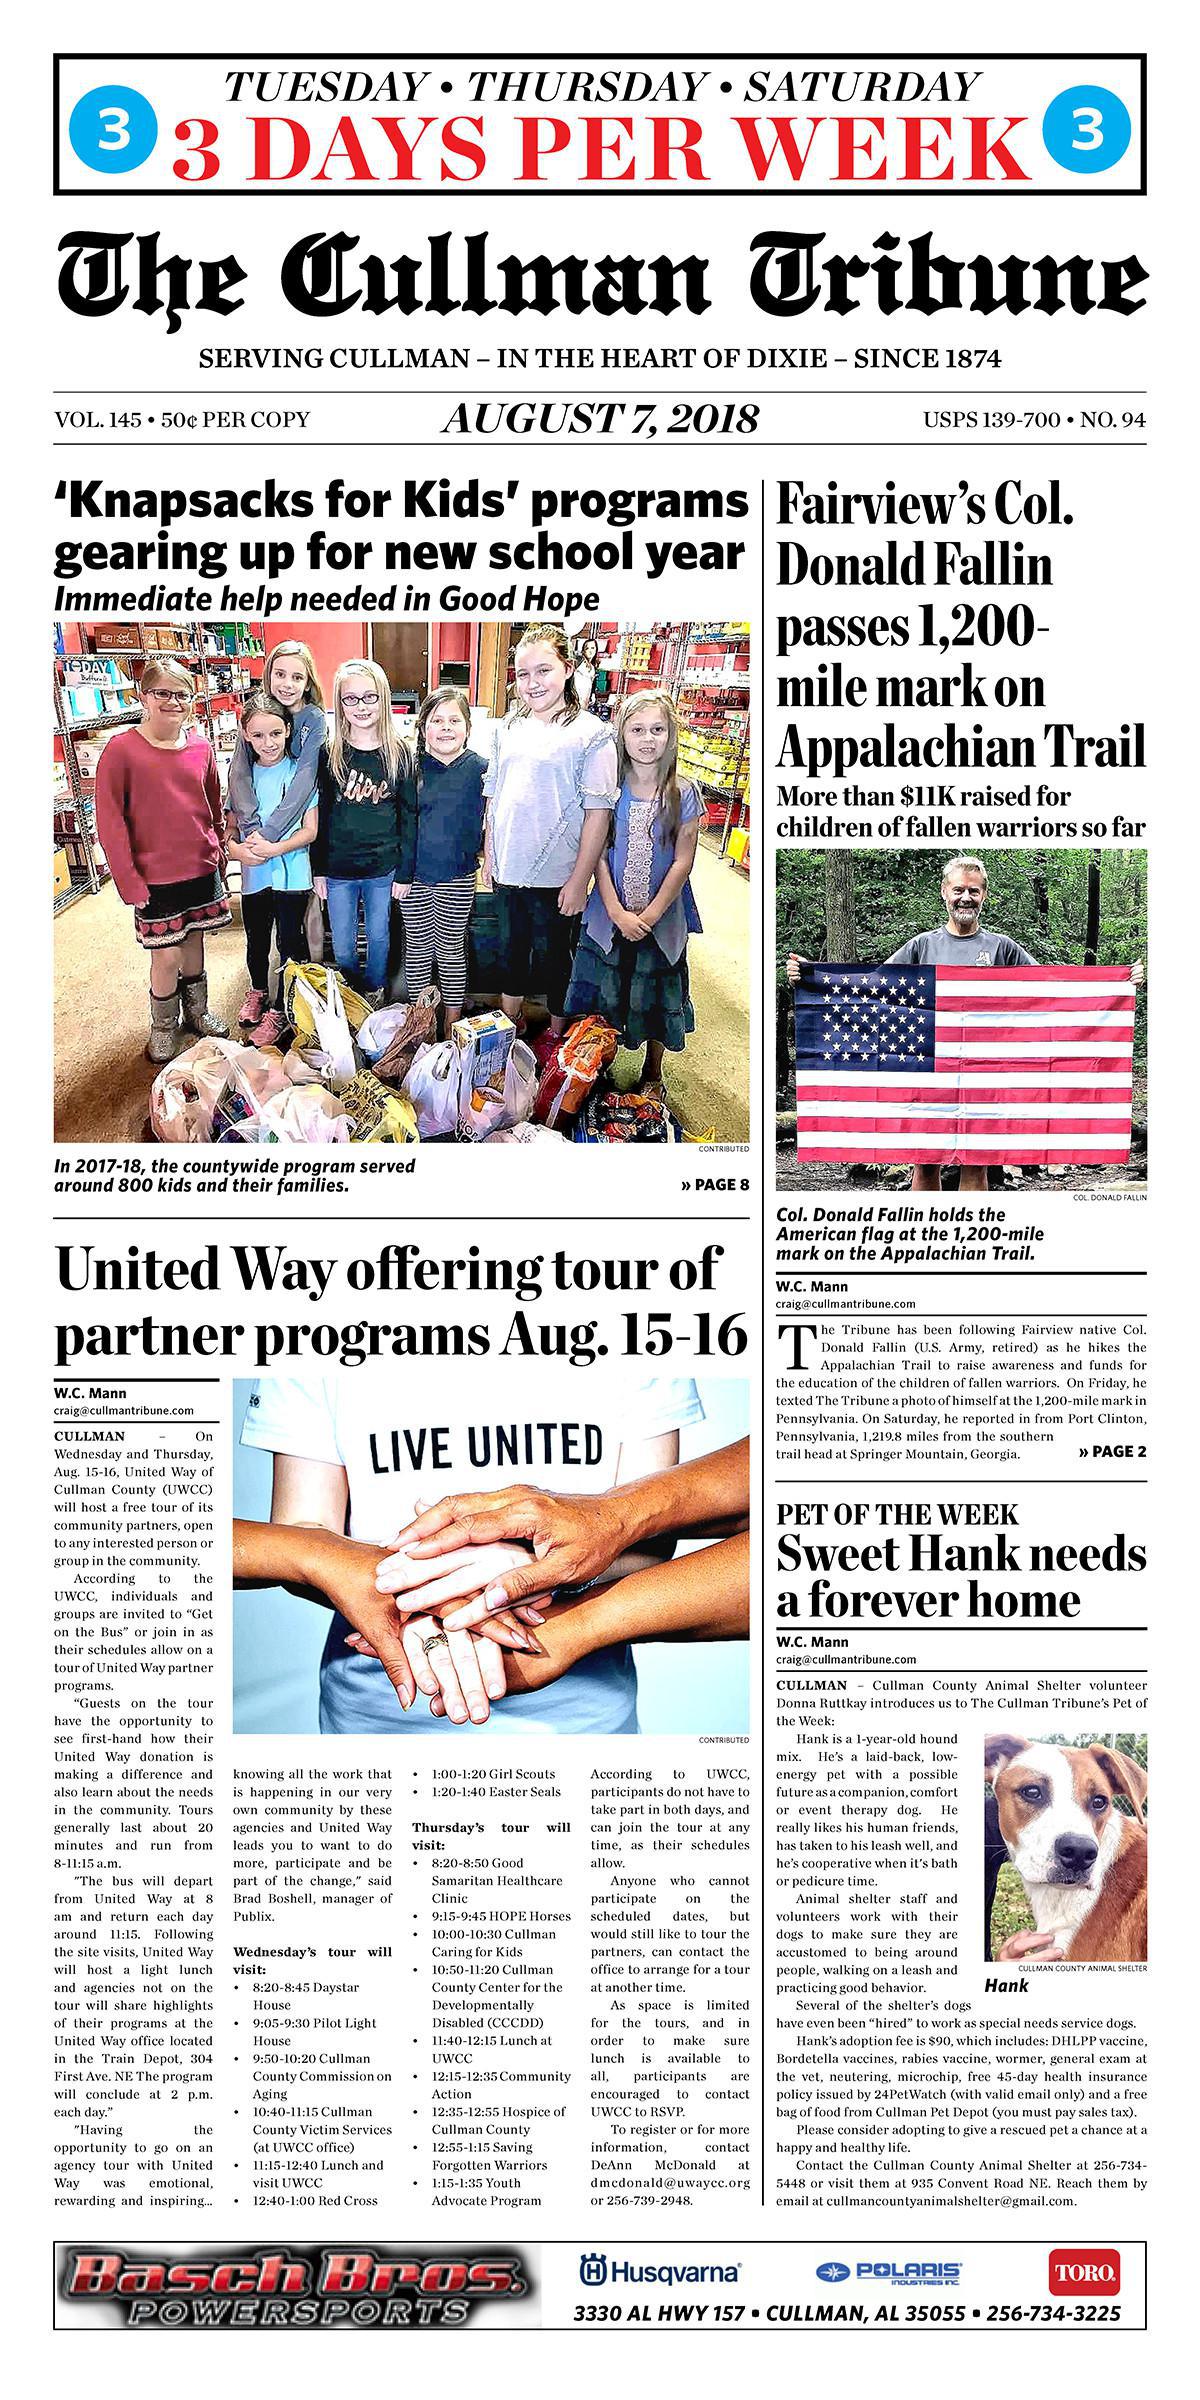 Good Morning Cullman! The 08-07-2018 edition of the Cullman Tribune is now ready to view